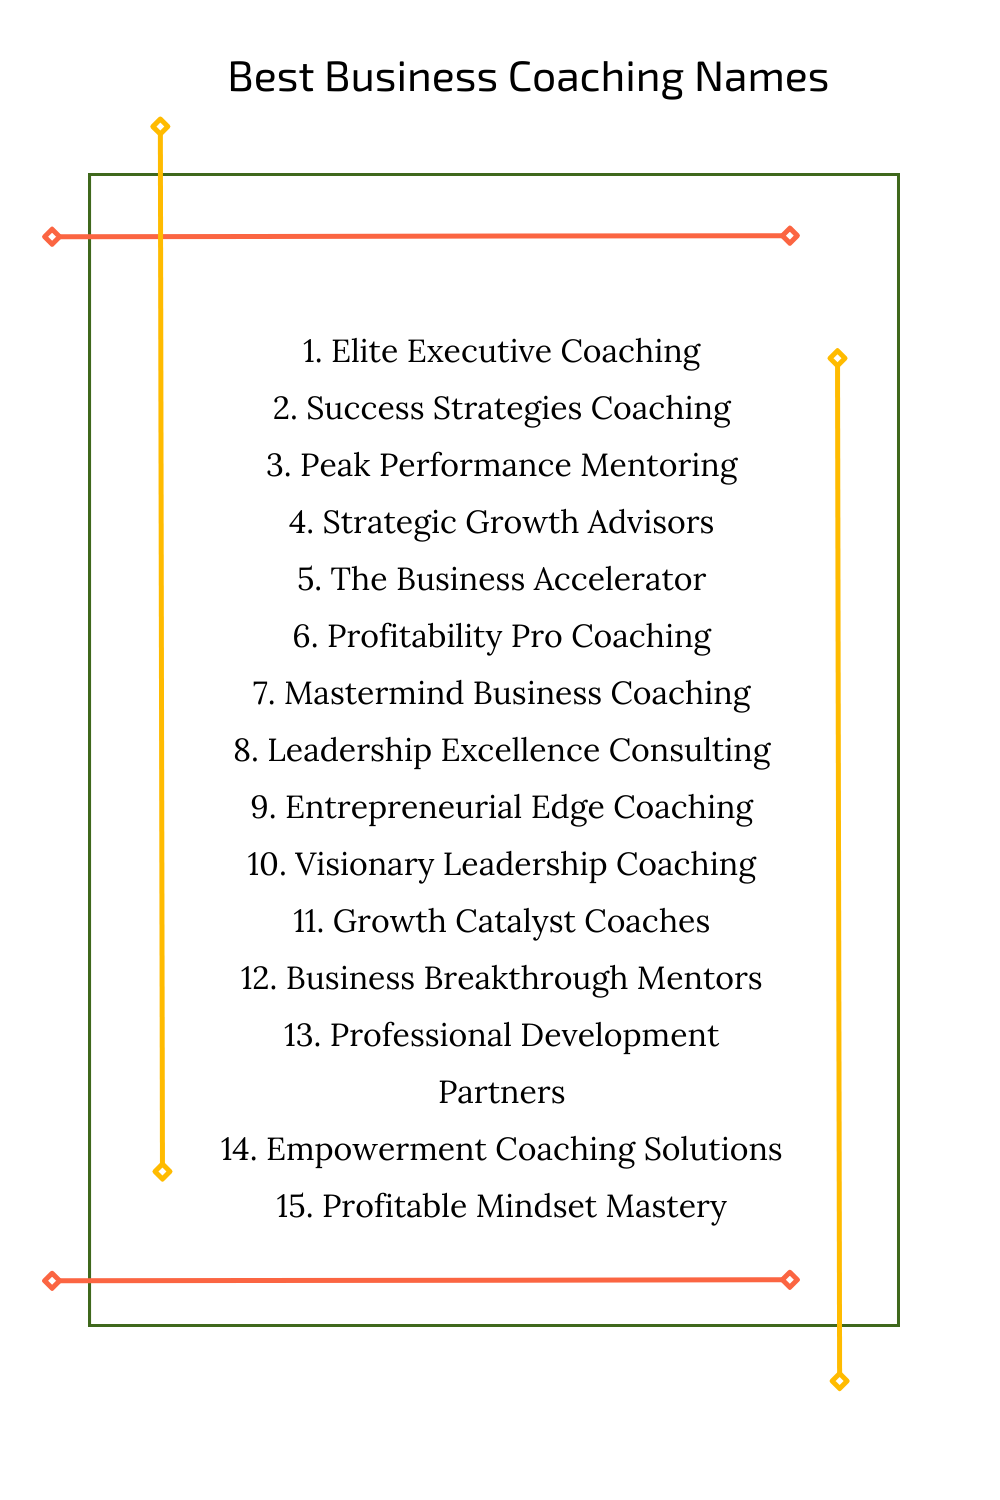 Best Business Coaching Names